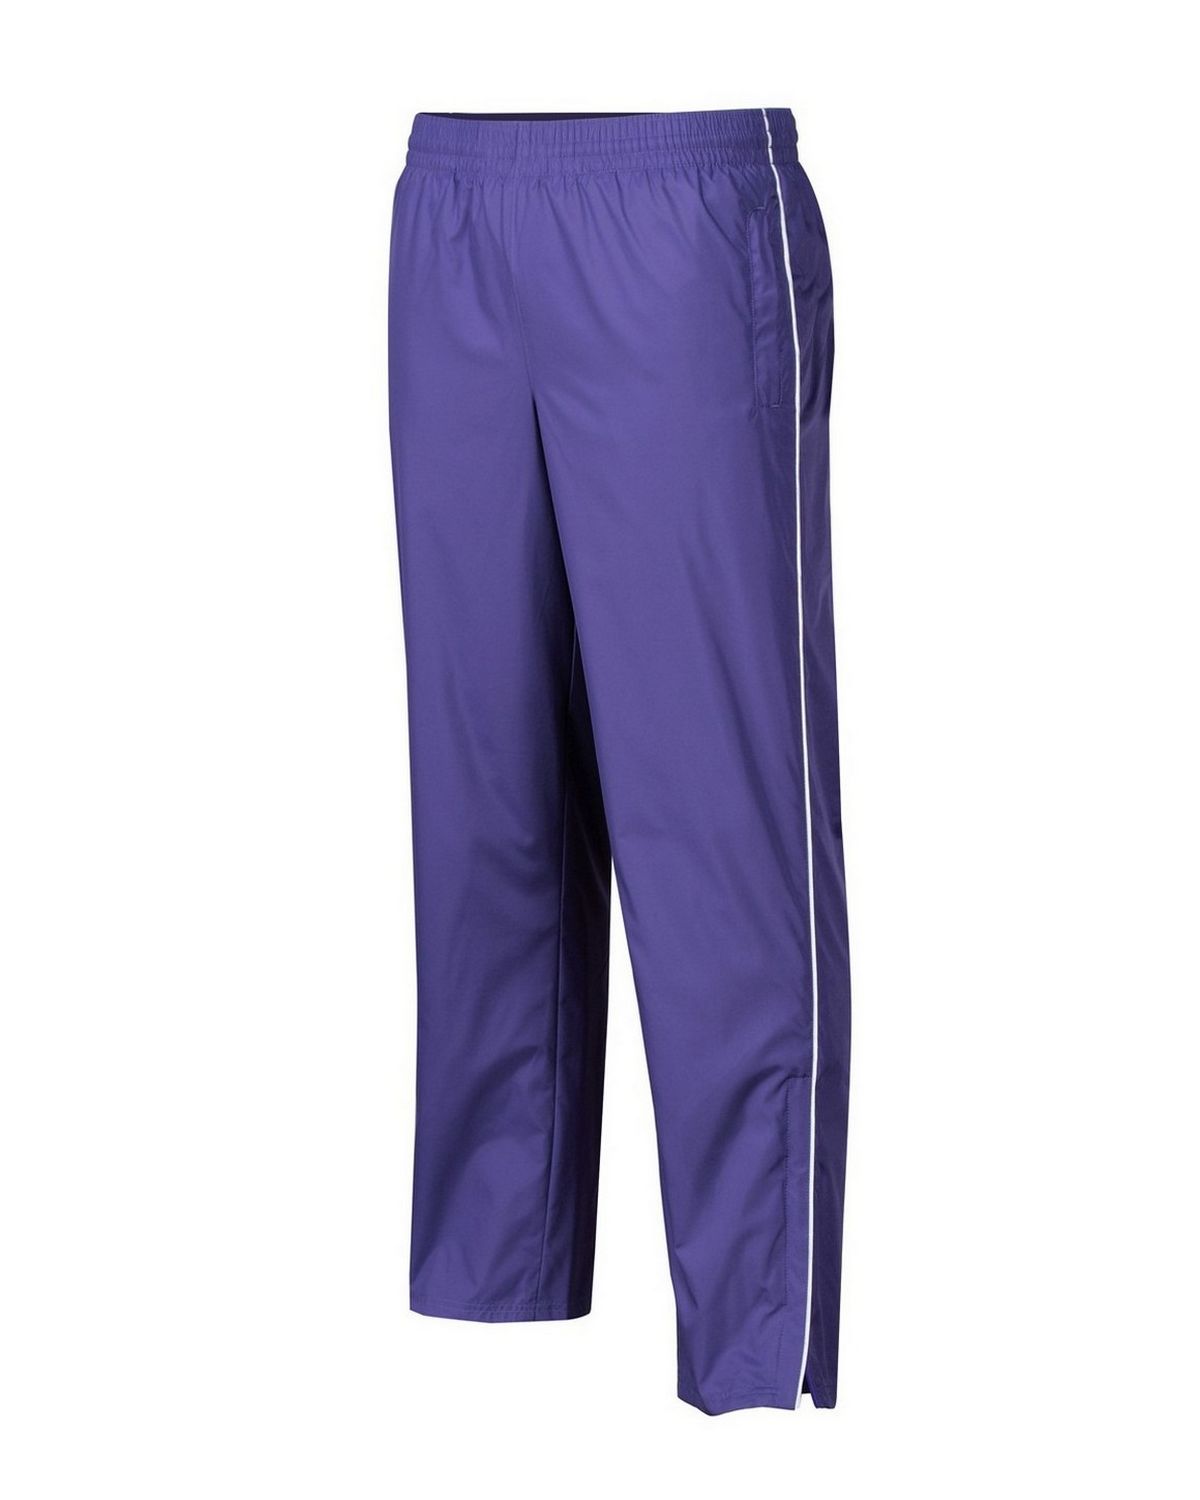 Tri-Mountain 2345 Women's micro wind pants with mesh lining